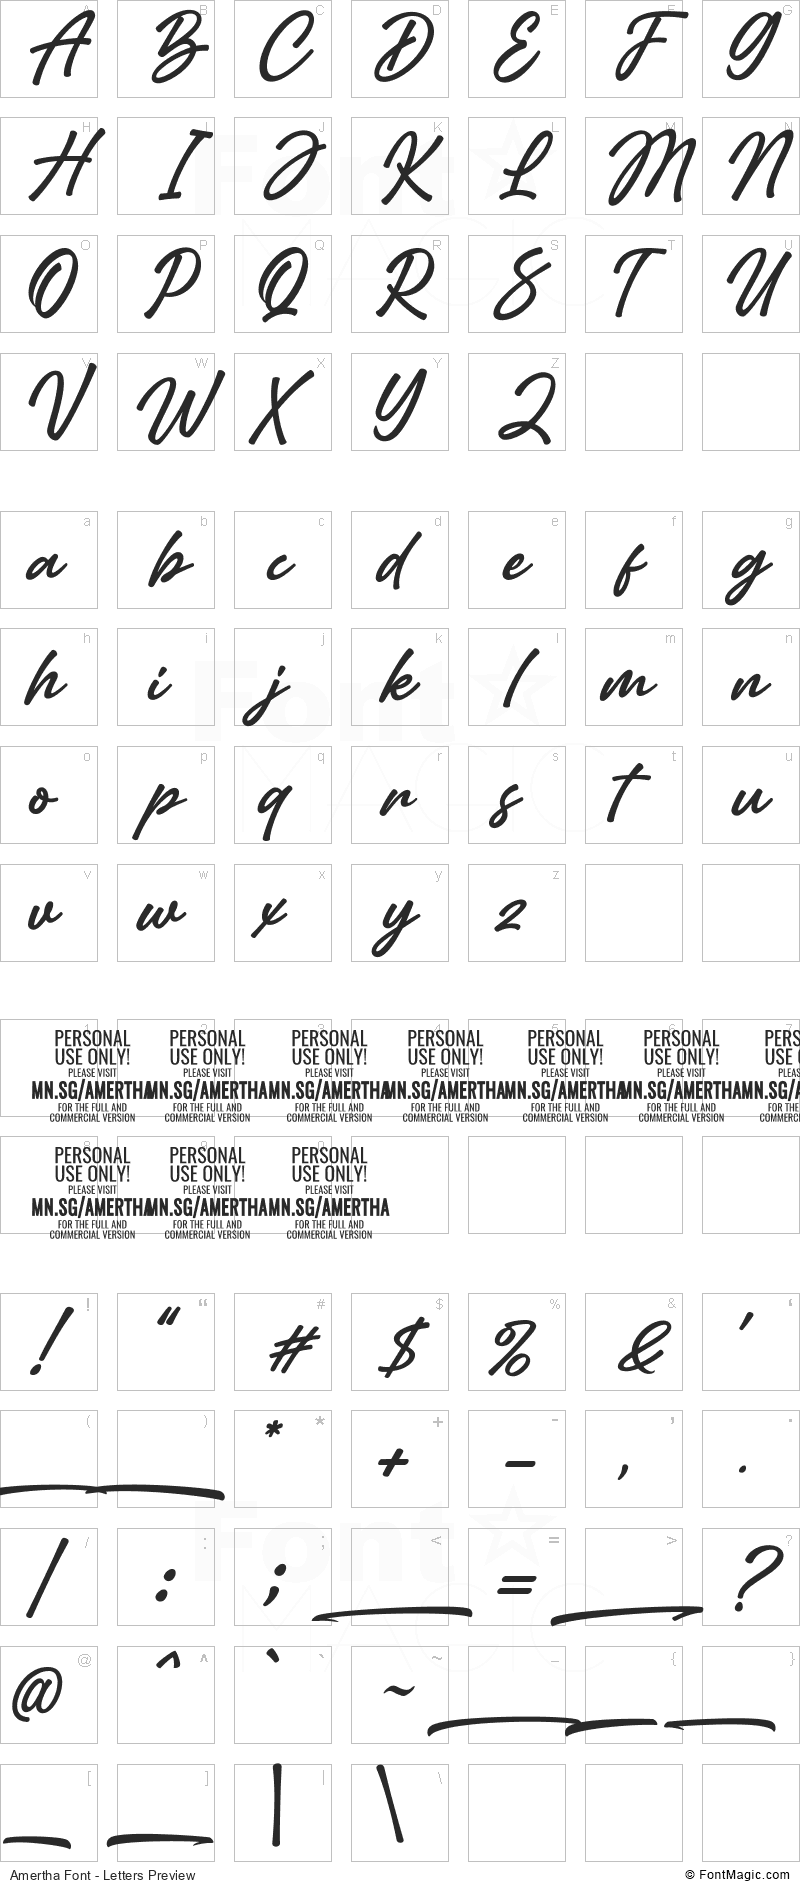 Amertha Font - All Latters Preview Chart